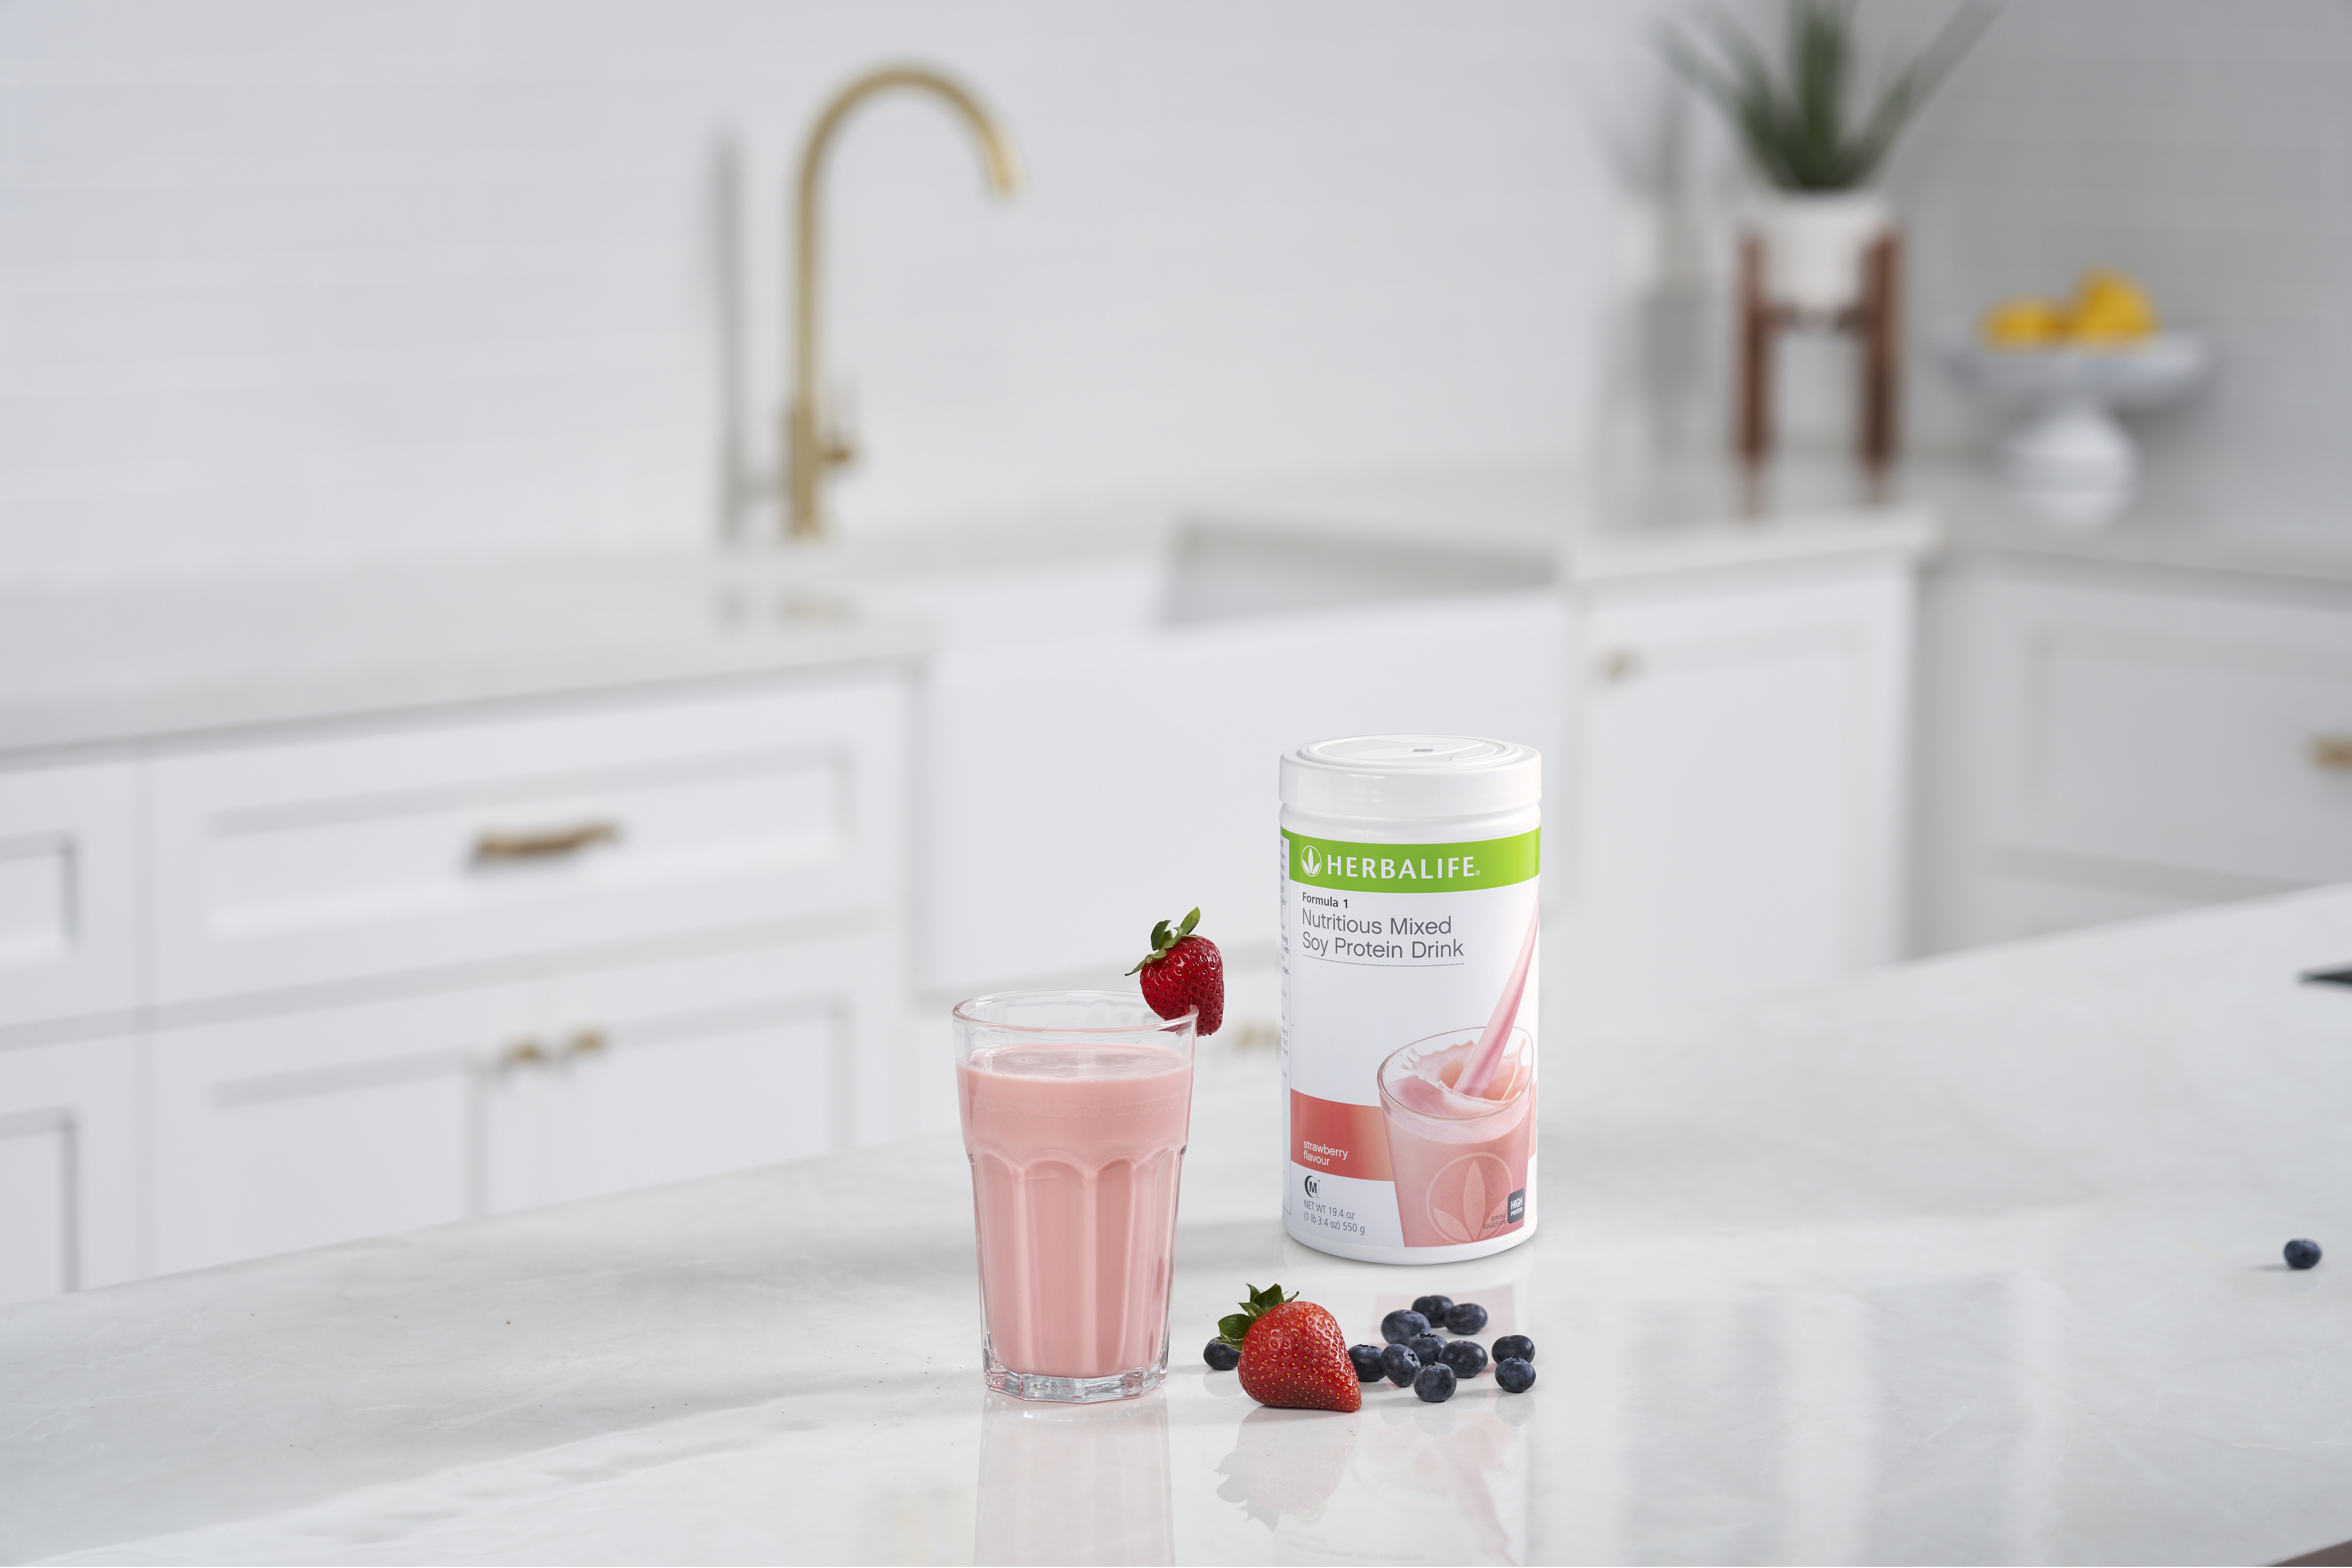 F1 Formula 1 Nutritious Mixed Soy Protein Drink Strawberry 